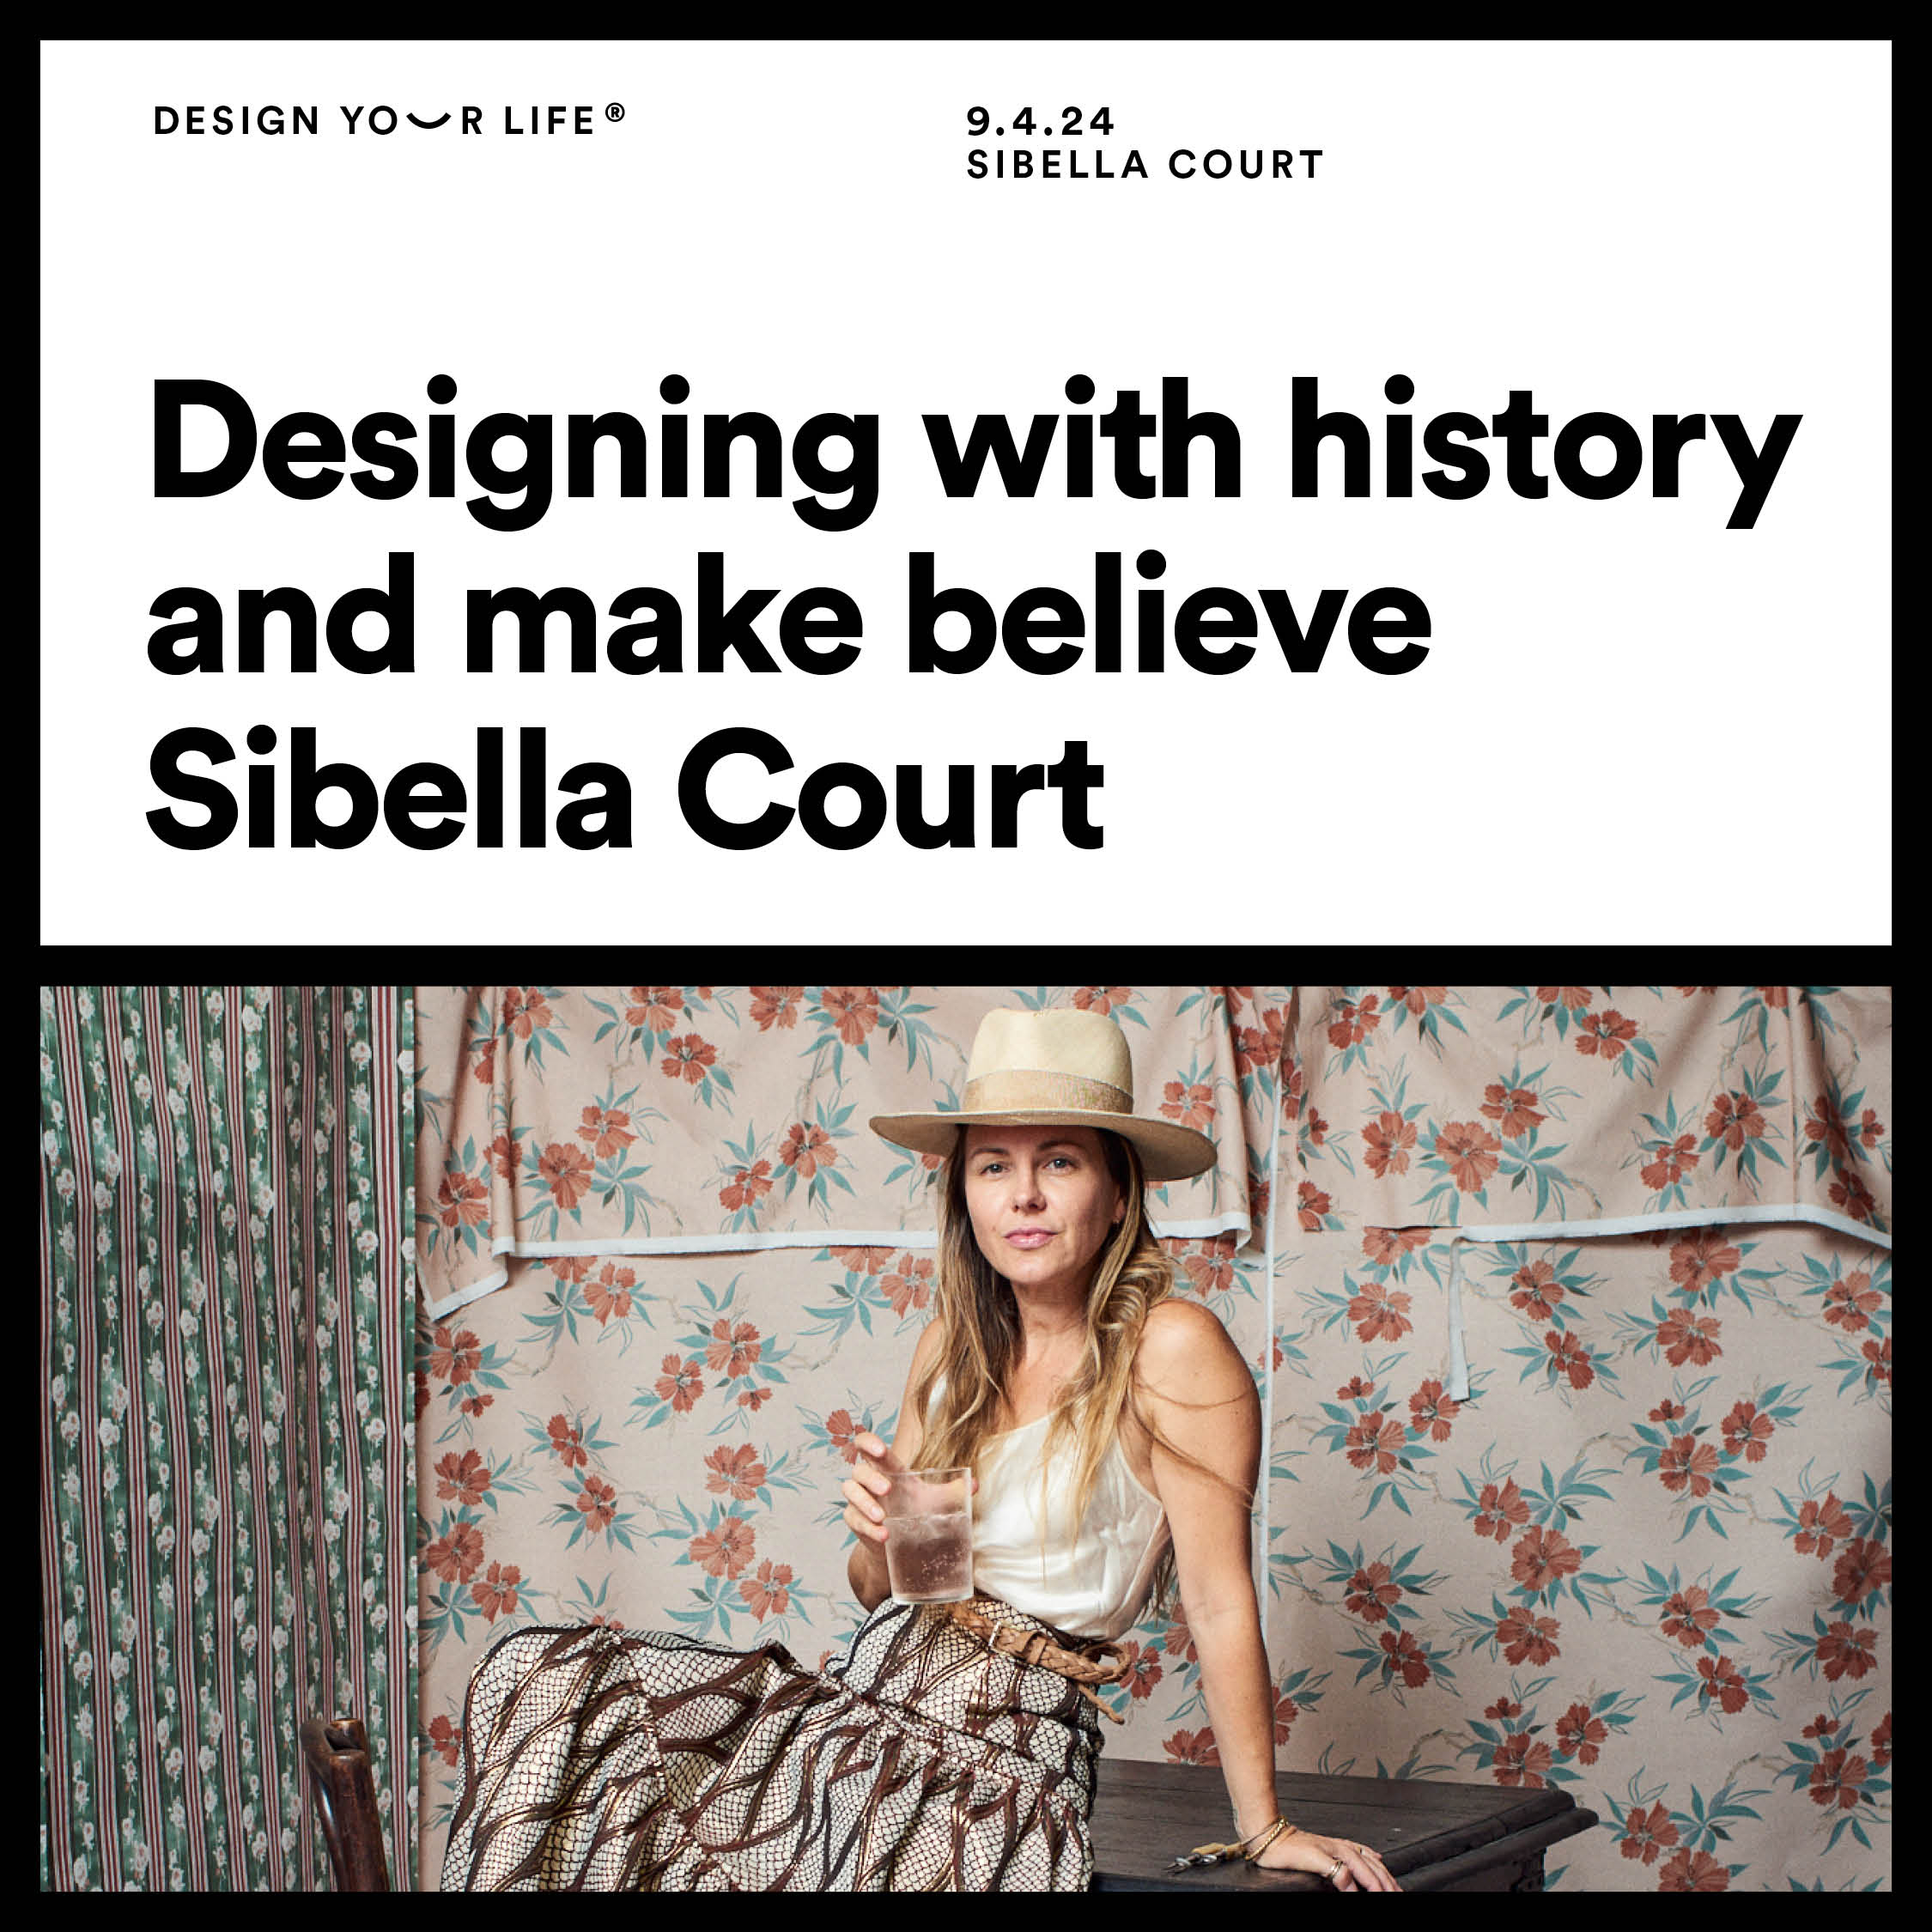 Designing with history and make-believe with Sibella Court